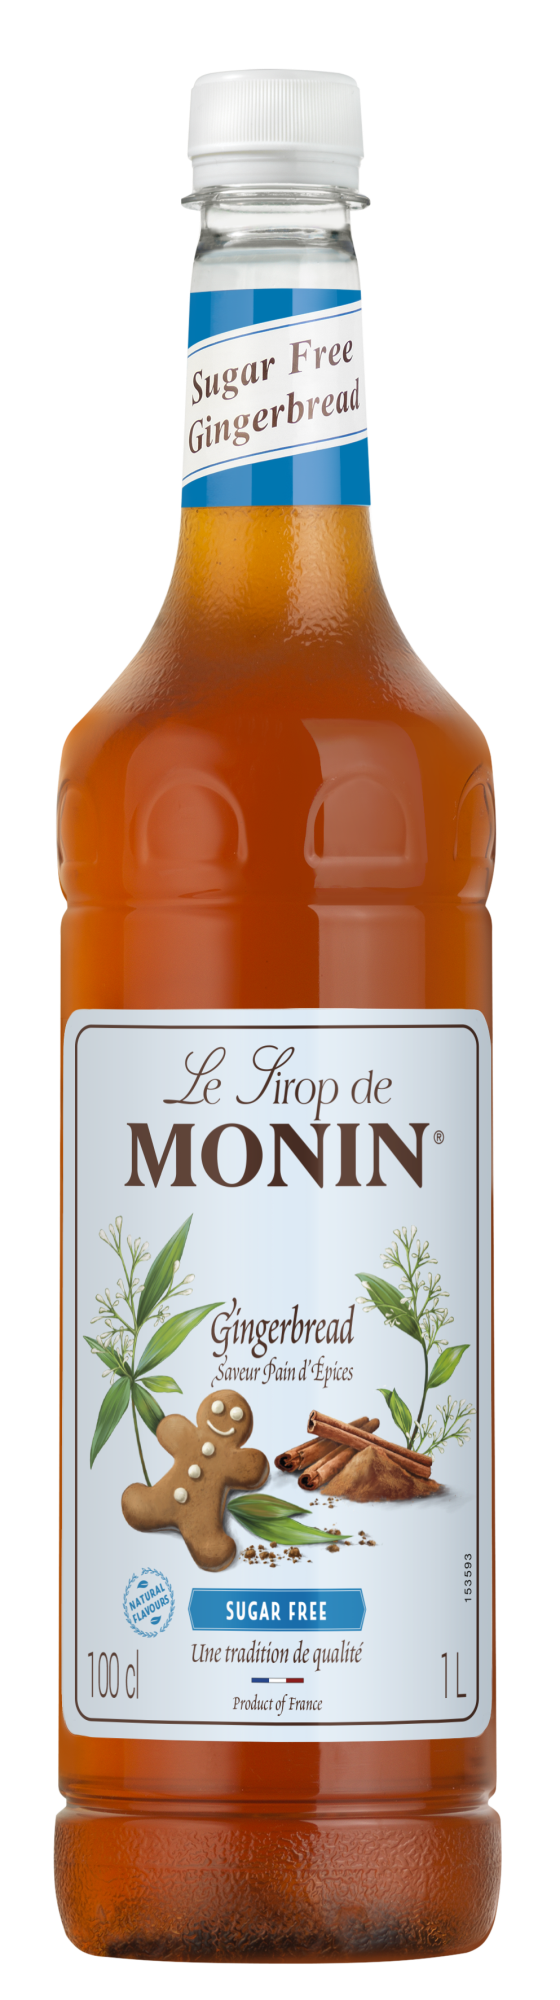 Buy MONIN Gingerbread Sugar Free syrup. It can be enjoyed year-round in milkshakes or iced and frozen coffees